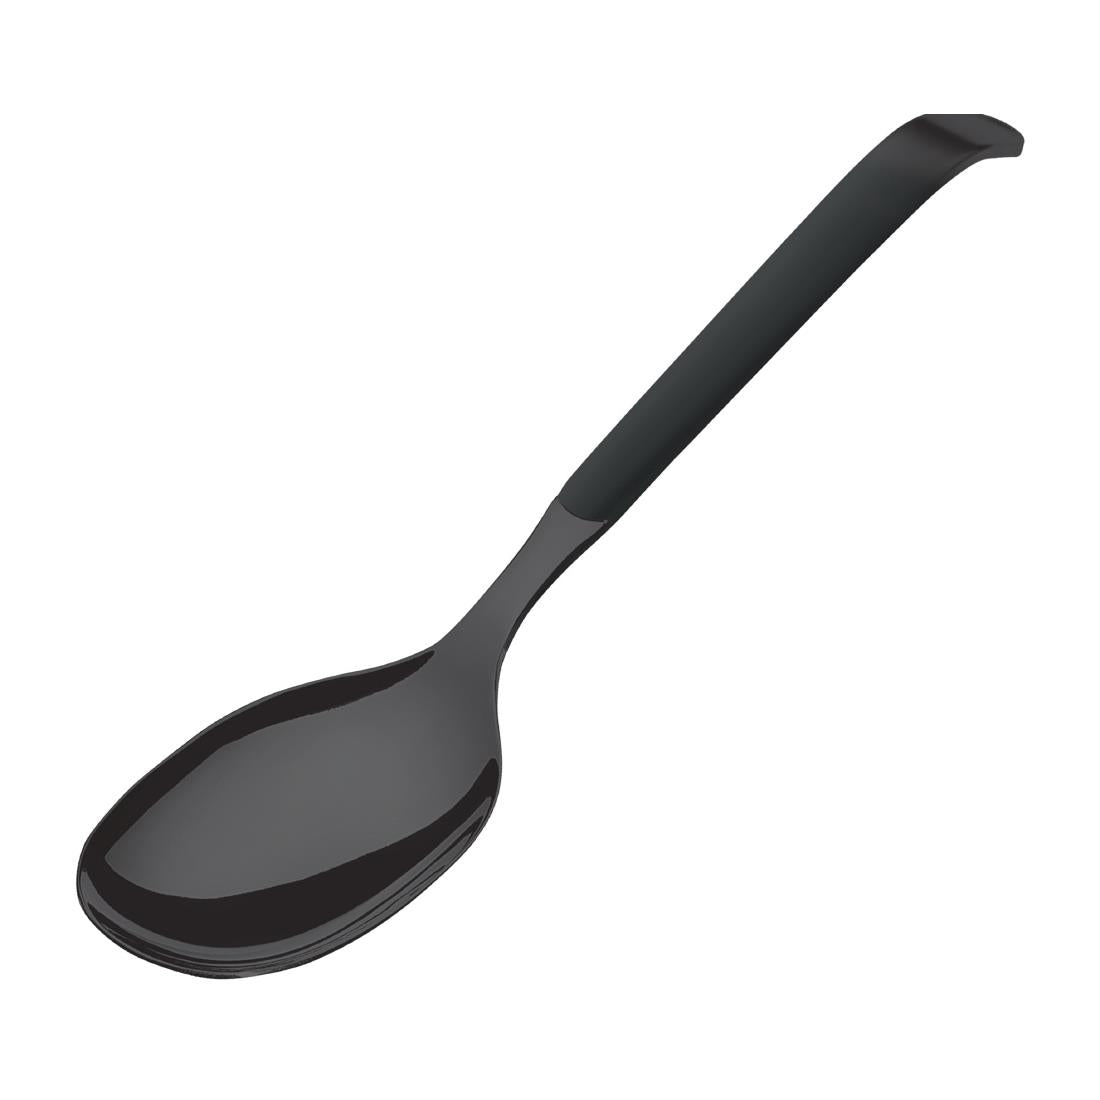 DX671 Amefa Buffet Small Serving Spoon Black (Pack of 6)